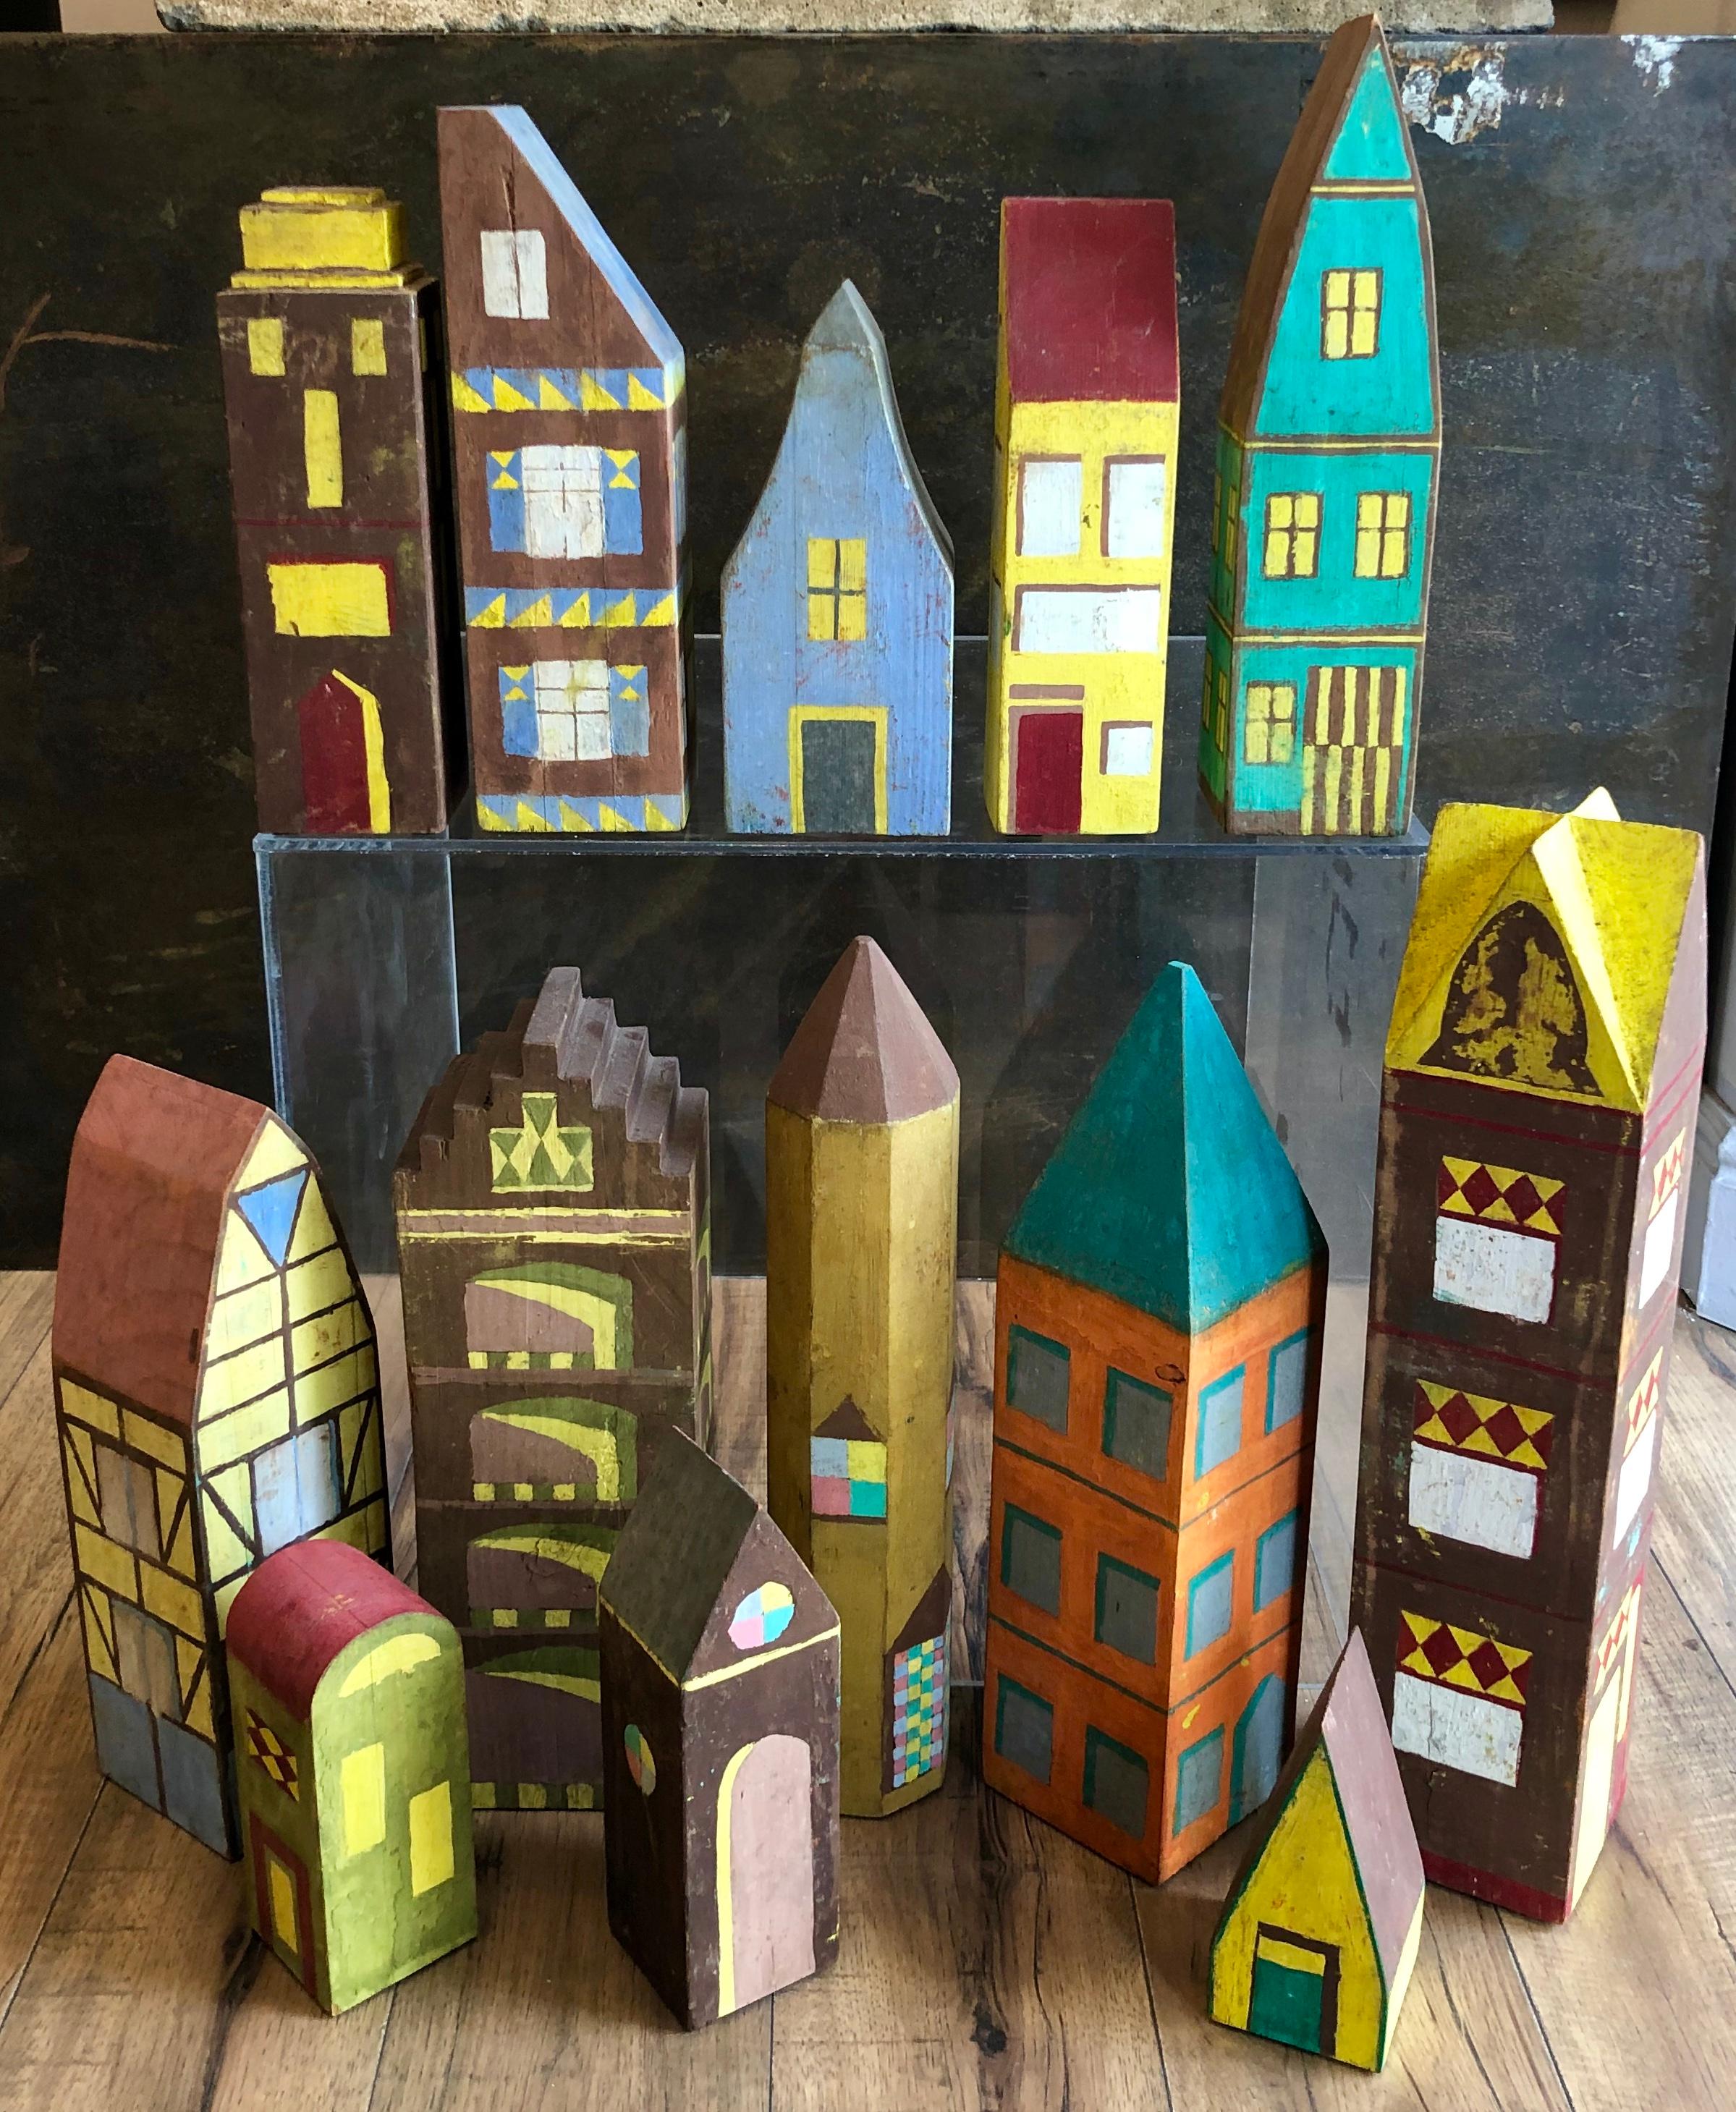 Collection of 13 hand constructed painted wood futuristic buildings creating a colorful cityscape. These were purportedly made by a professor teaching at or around Chautauqua in the 1920s. The paint is dray and early from that period. Great